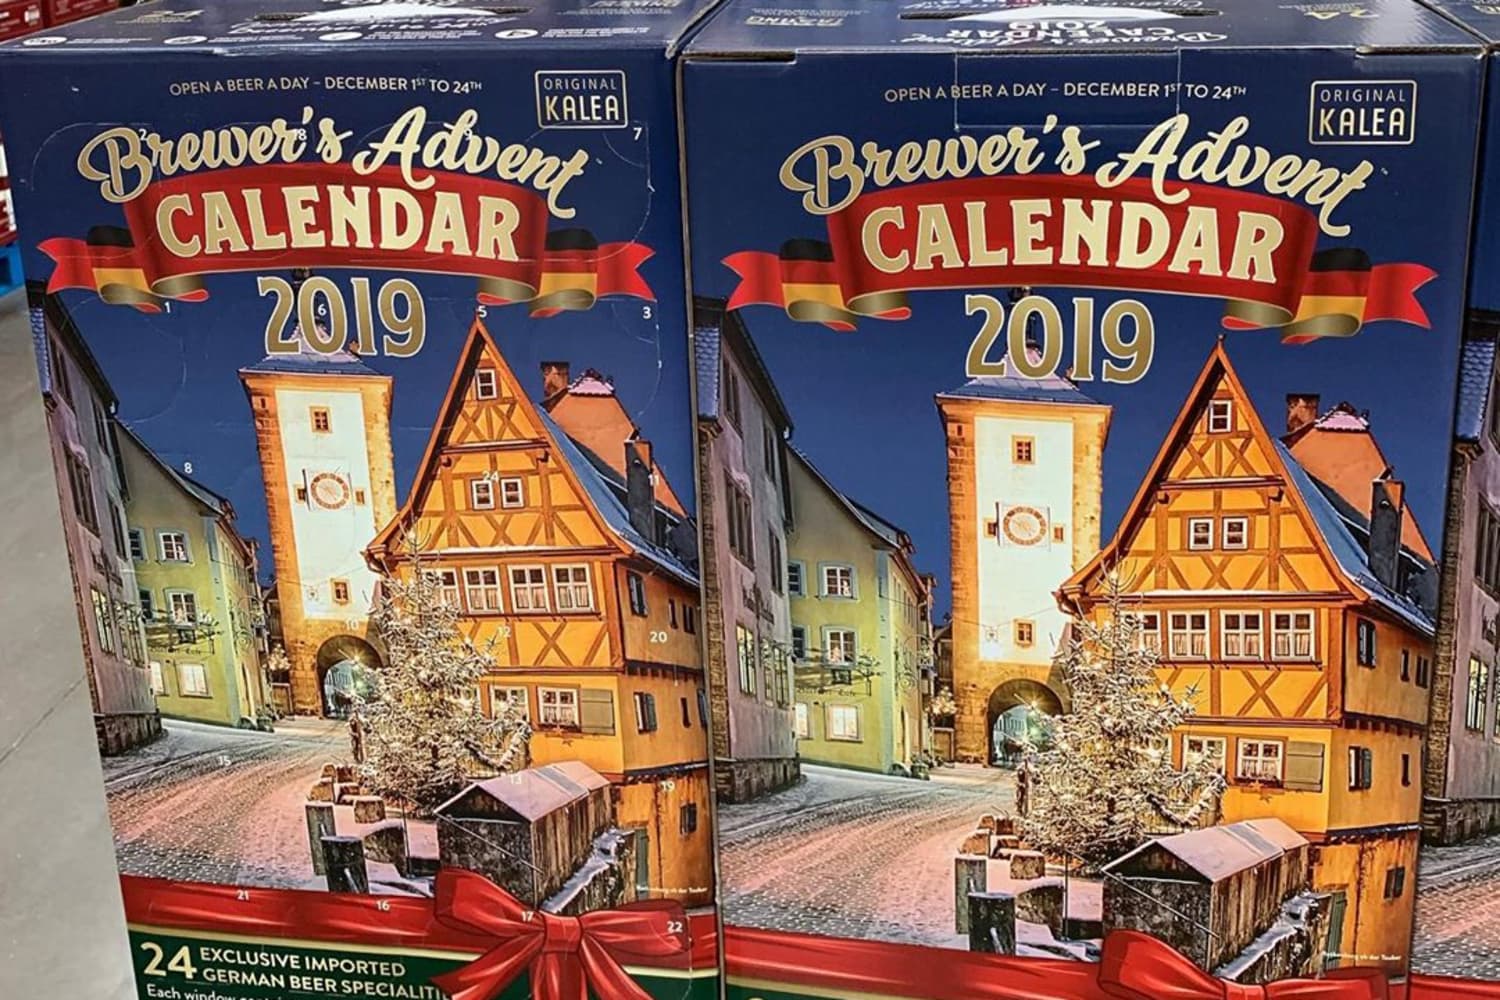 Costco Is Now Selling a German Beer Advent Calendar for the Holidays